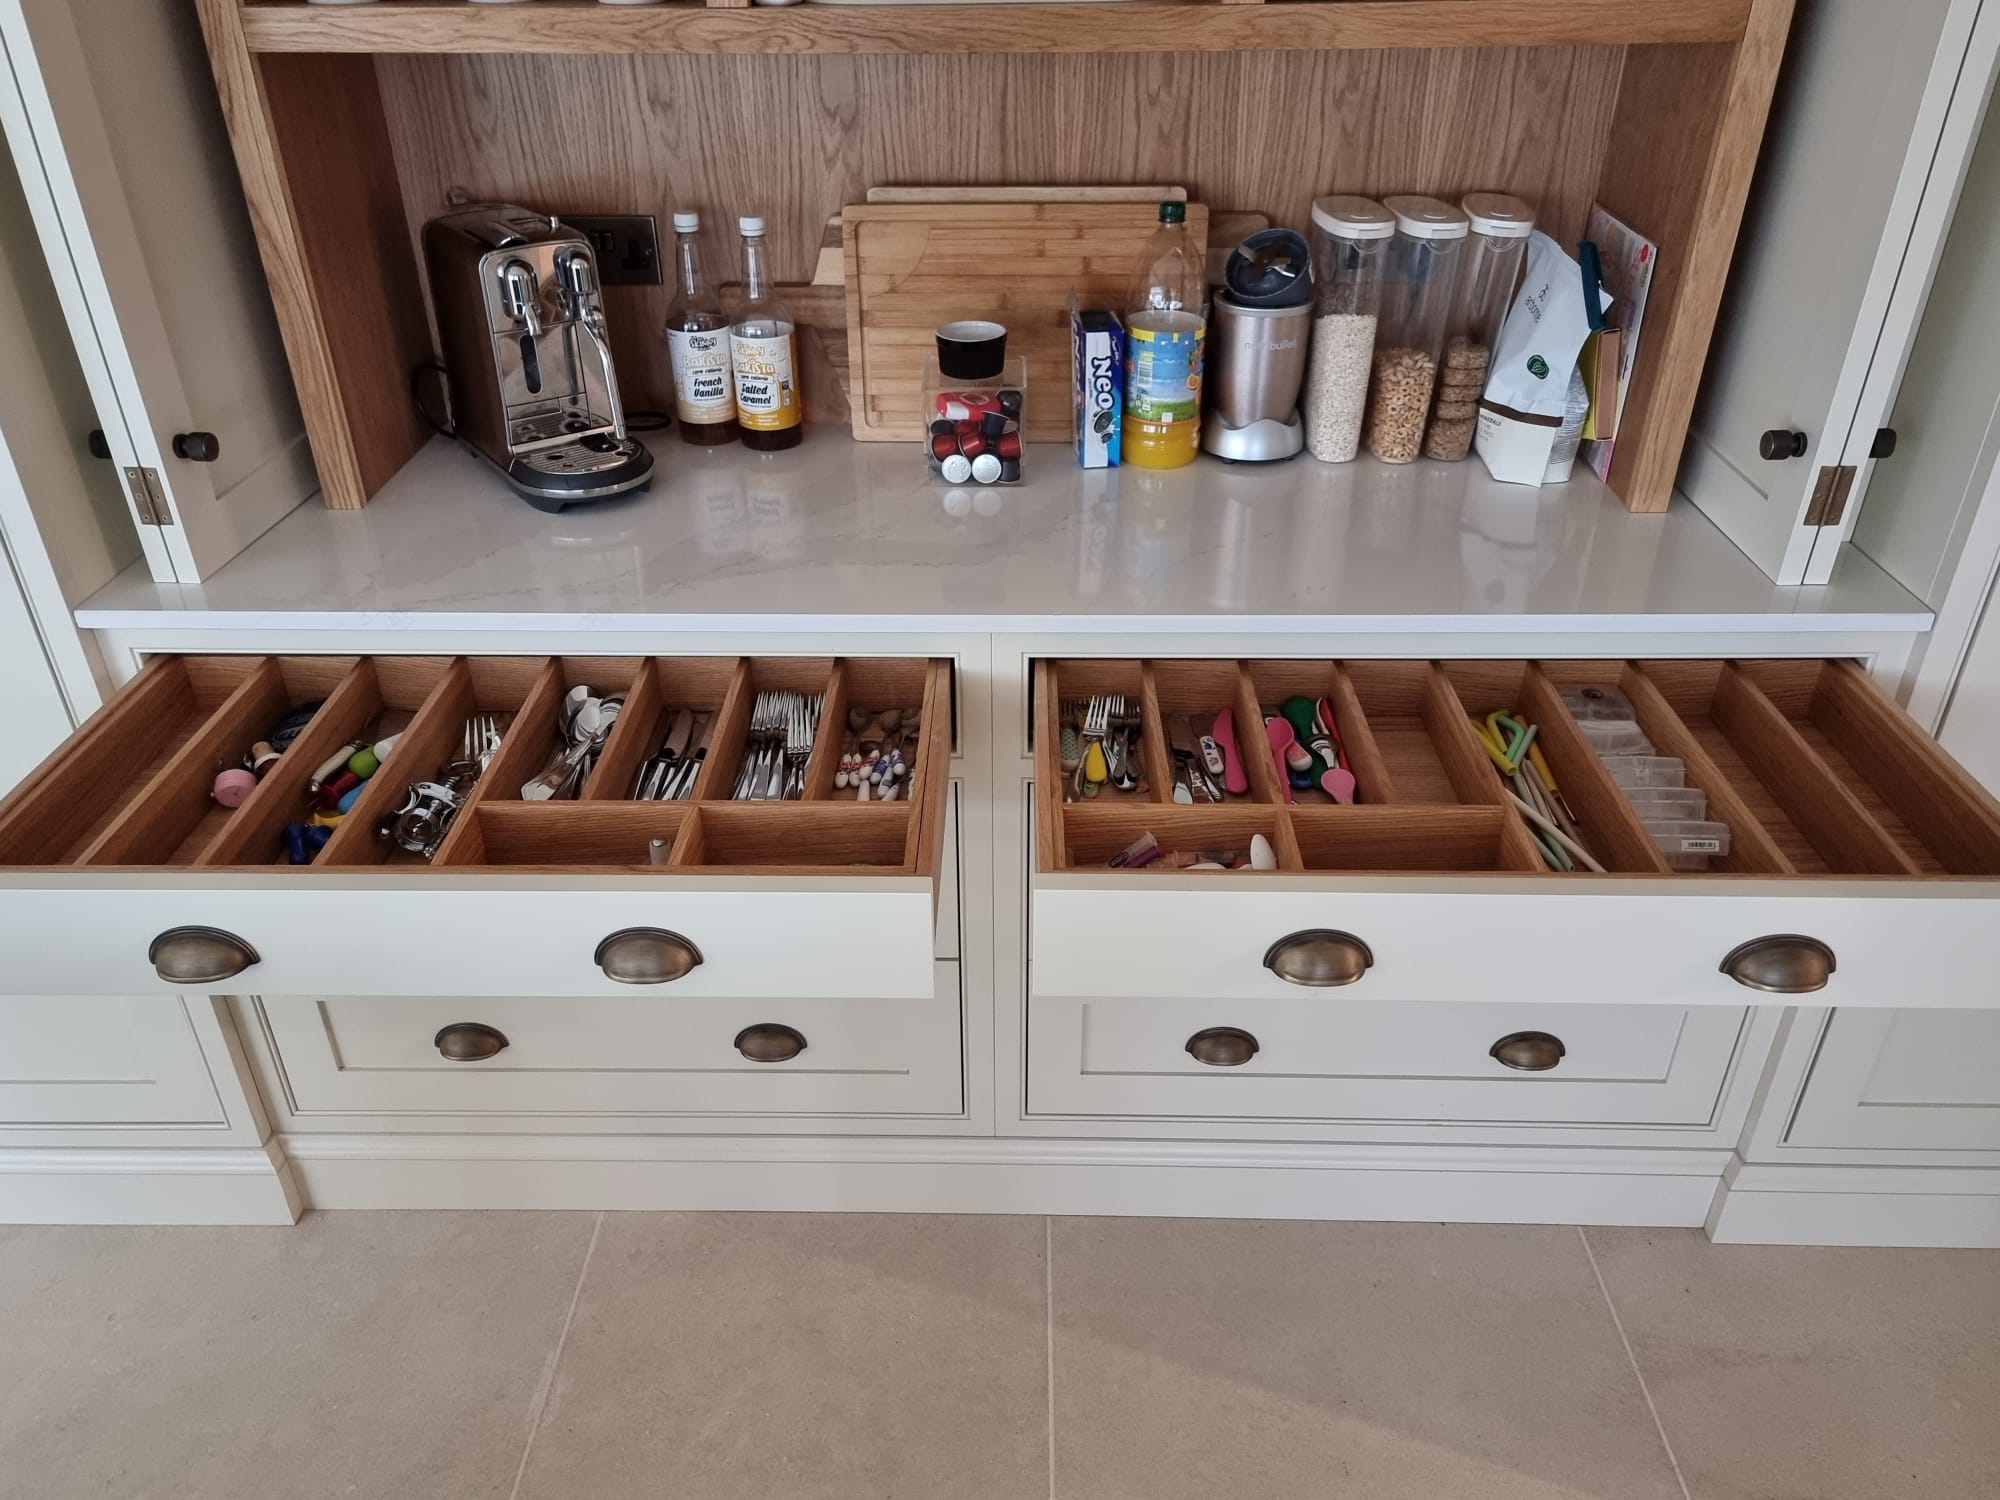 Bespoke timber kitchen storage by Kings Stag Joinery